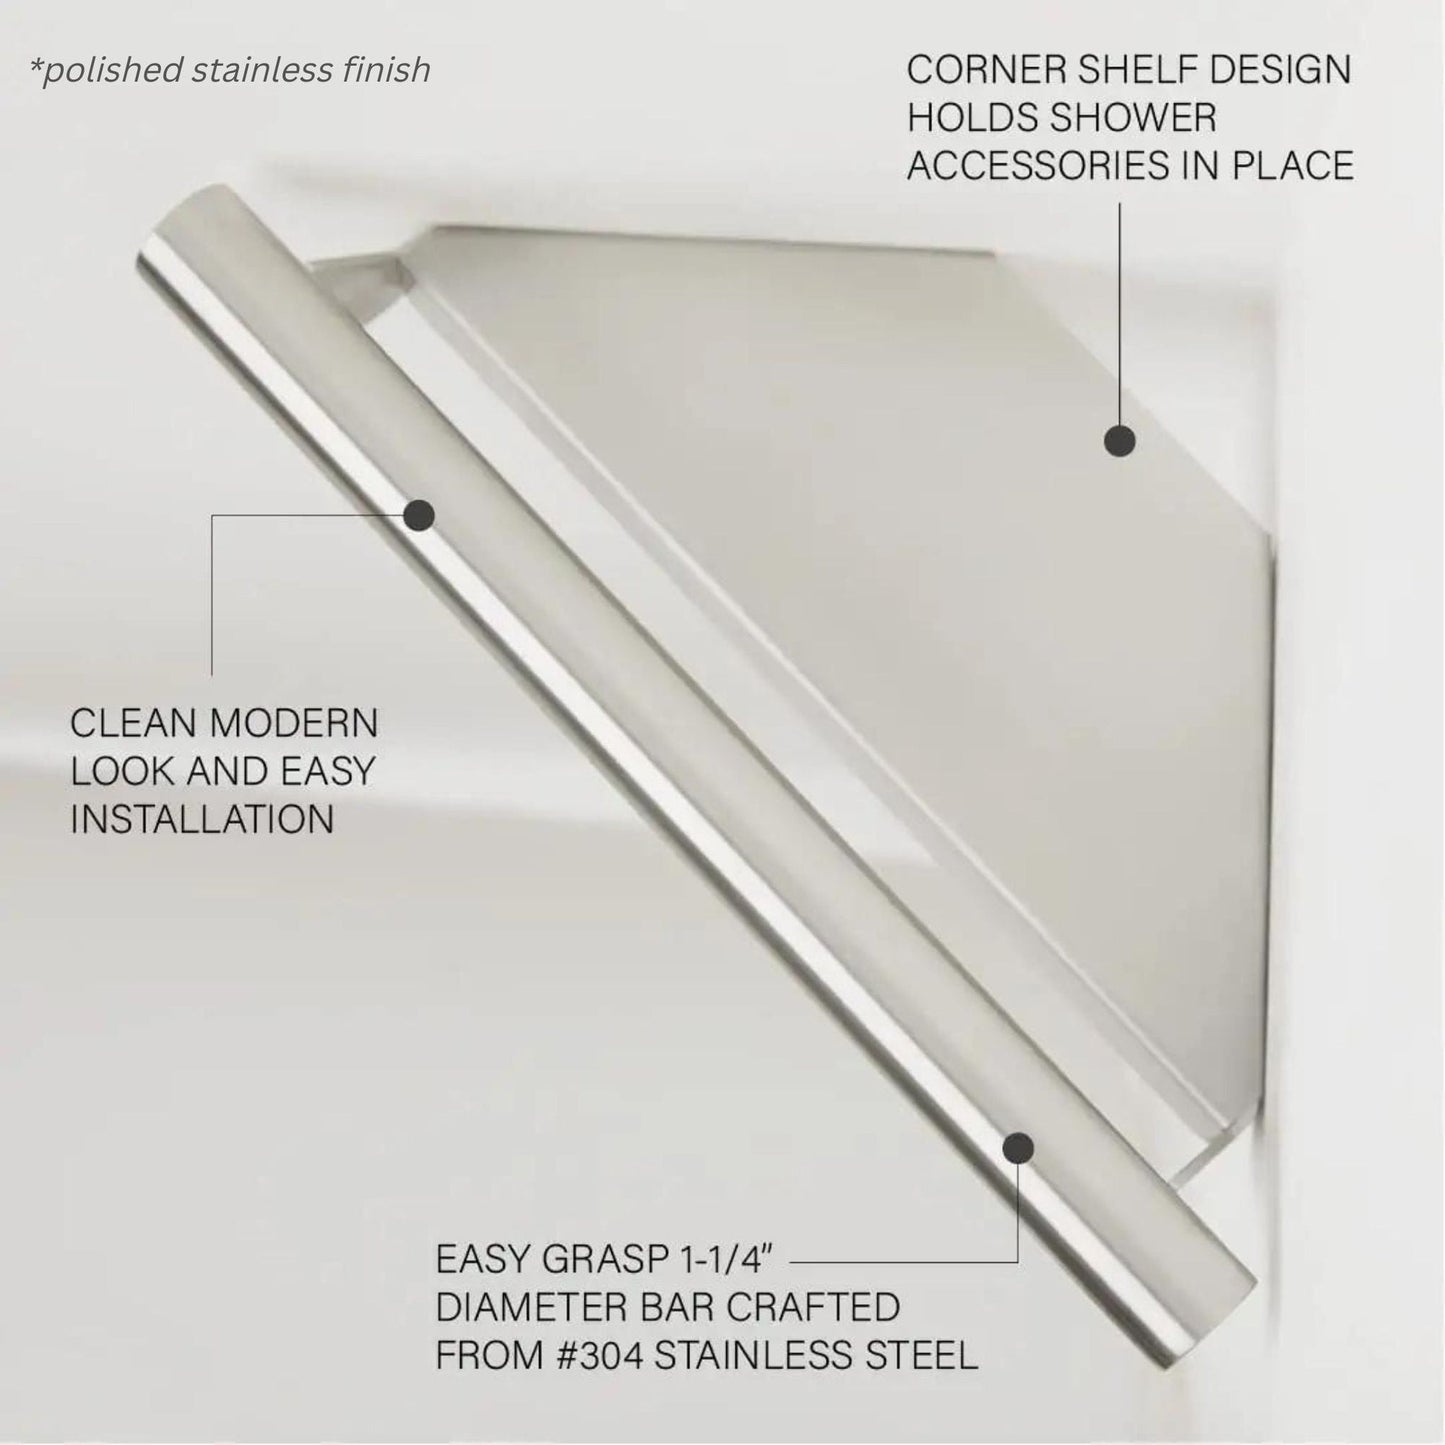 Seachrome Lifestyle and Wellness Series 14" x 8.5" Corner Shower Shelf With Handle in Satin Stainless Finish